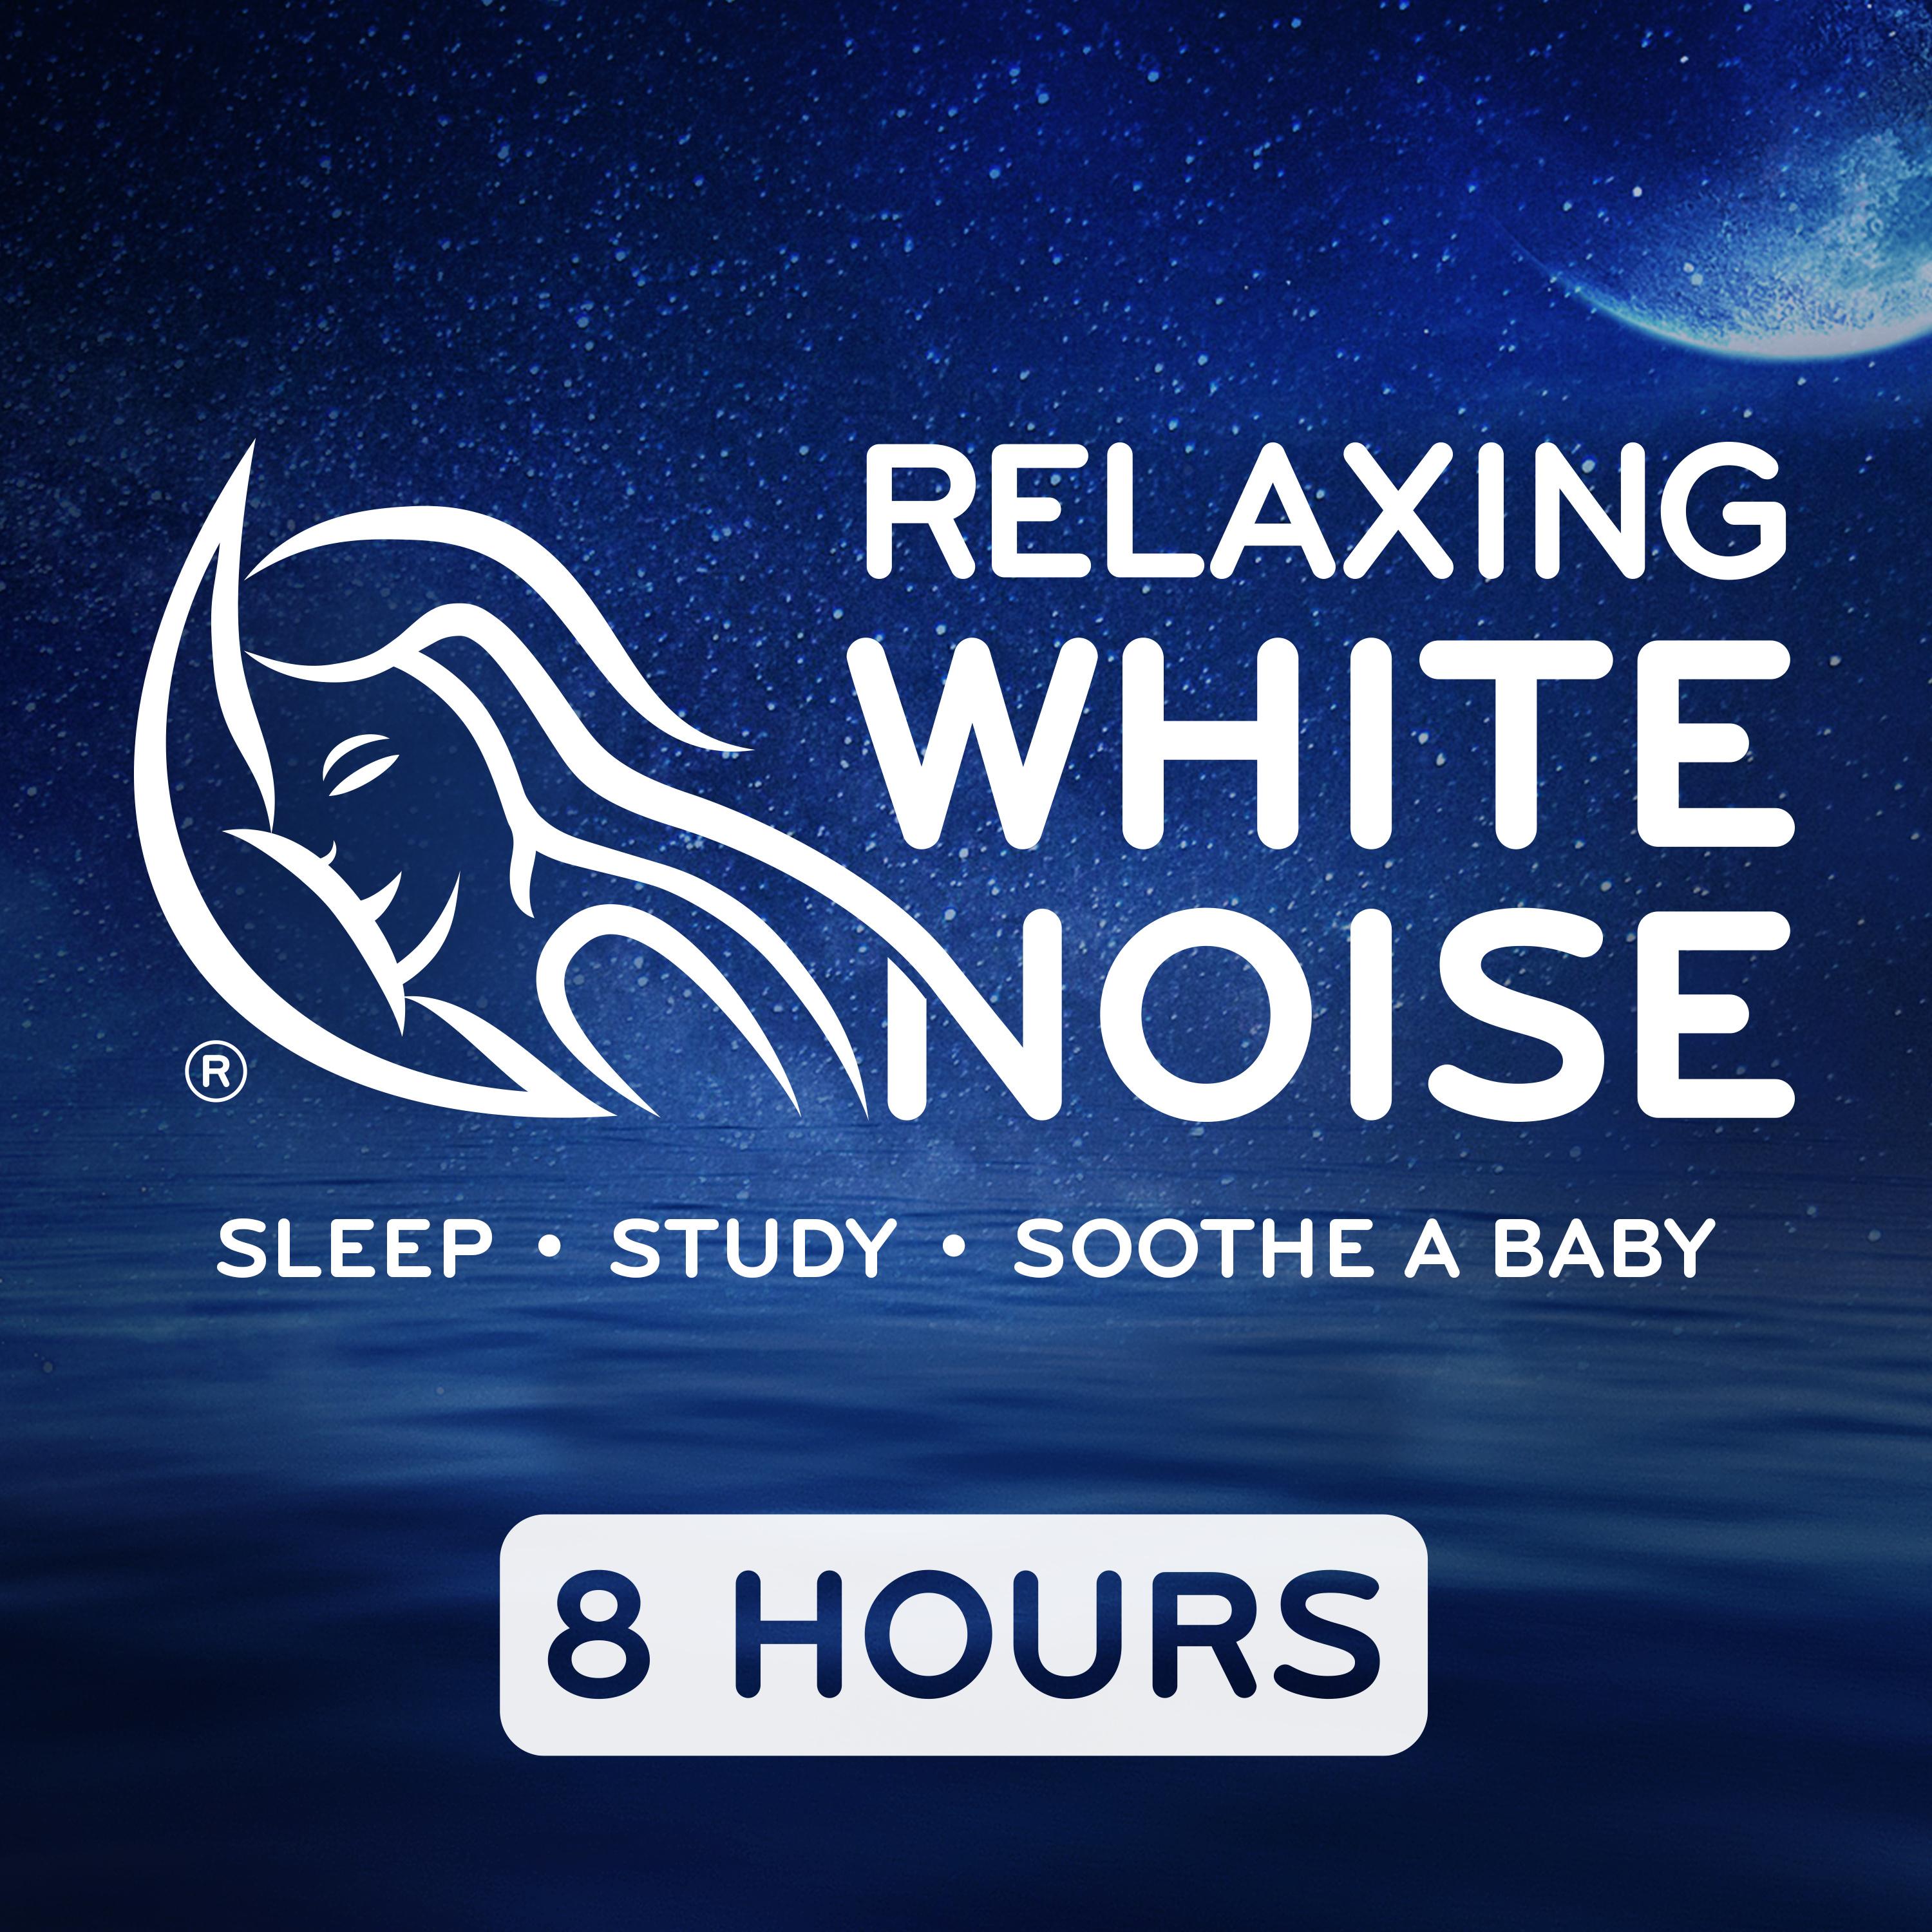 TV Static White Noise 8 Hours | Sleep, Study or Focus